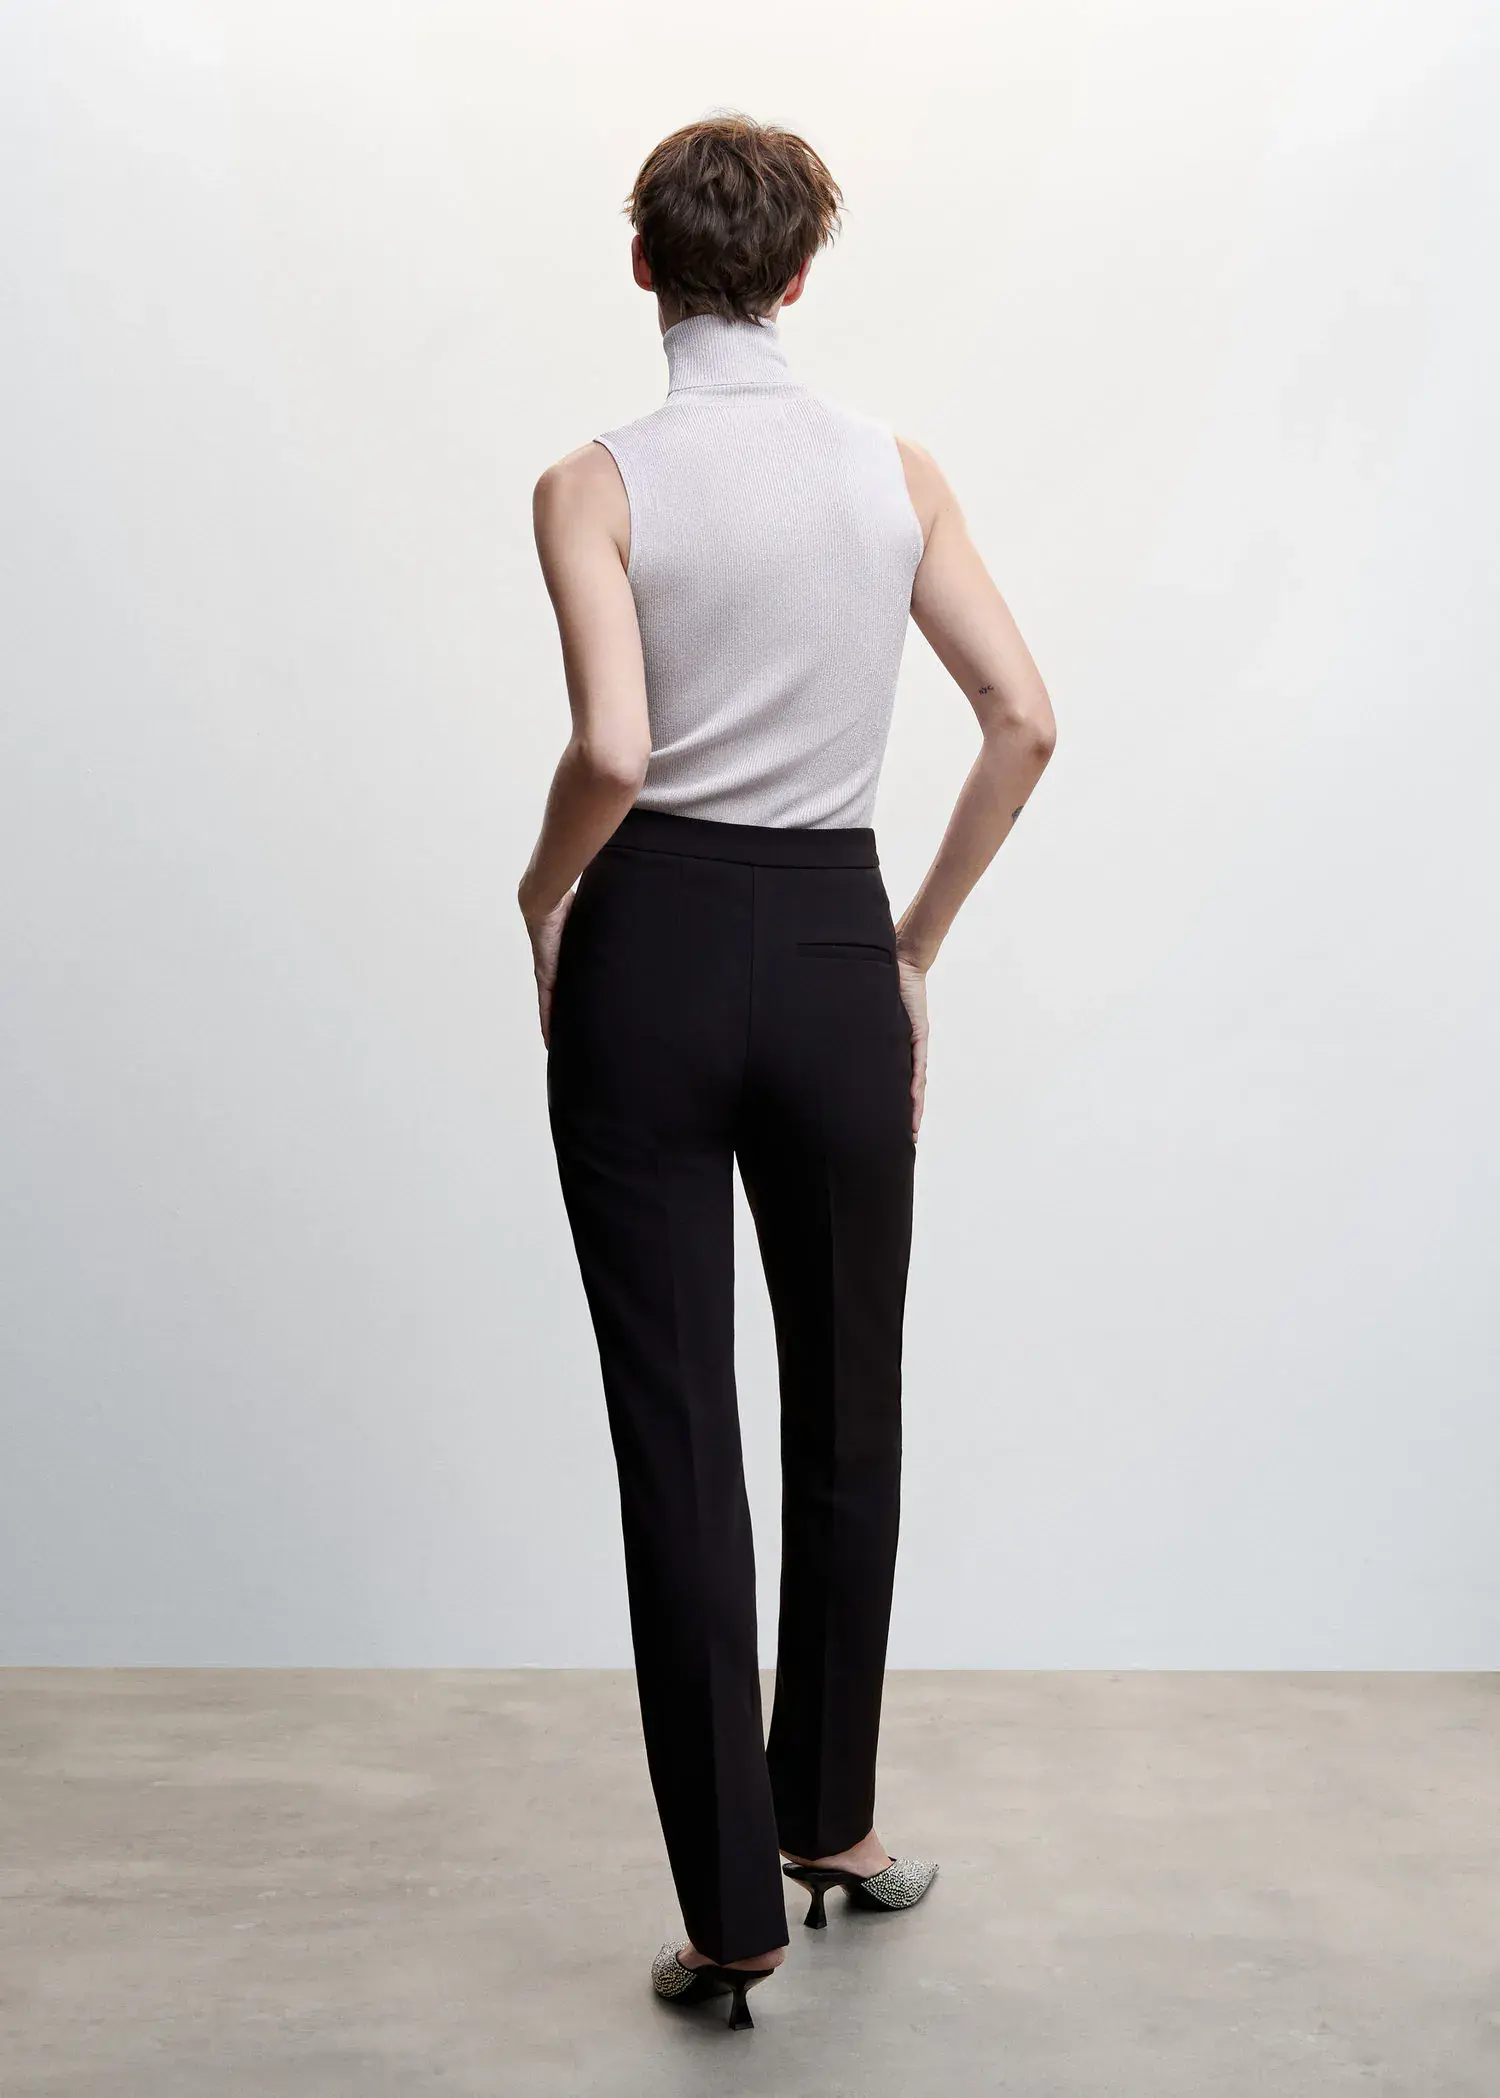 Mango Turtleneck knit top. a woman in a white shirt and black pants. 